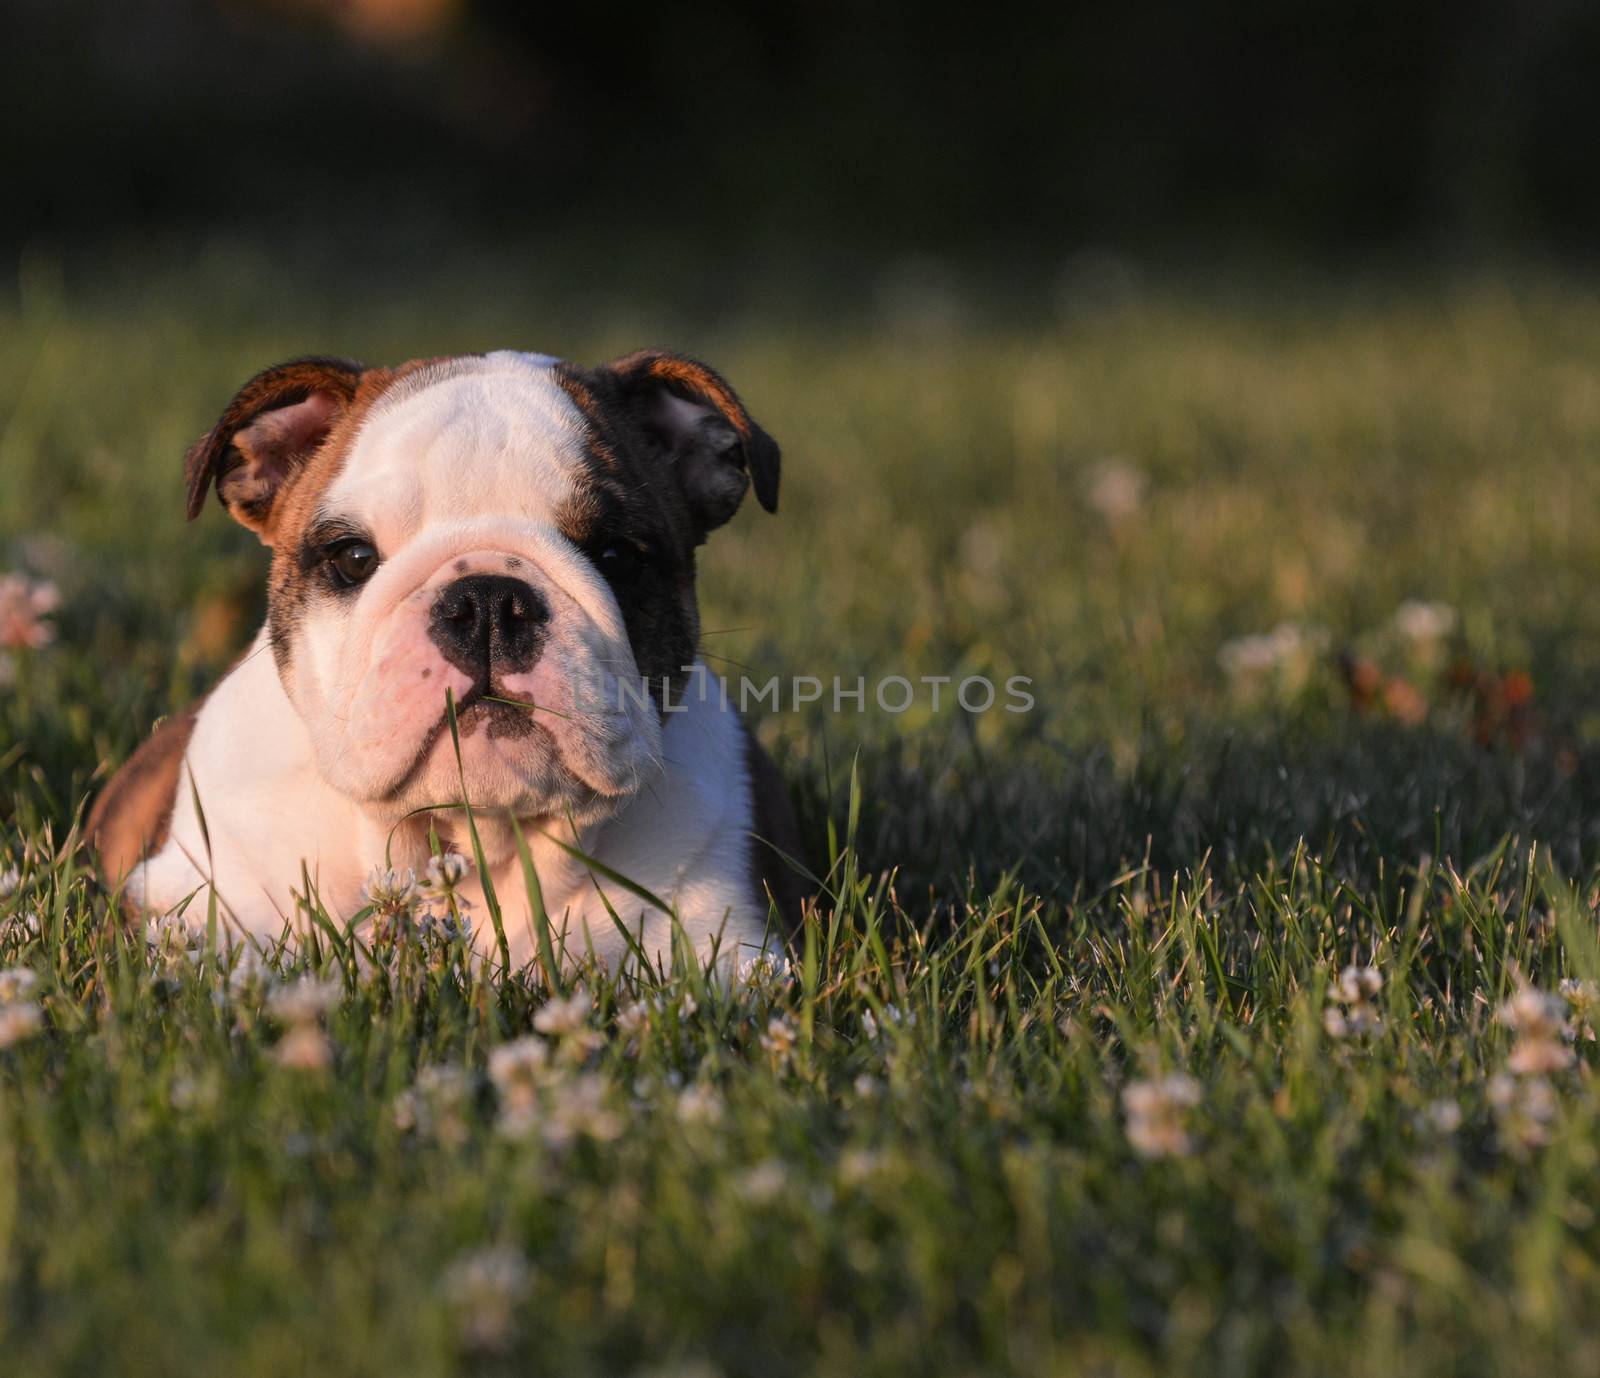 puppy eating grass by willeecole123